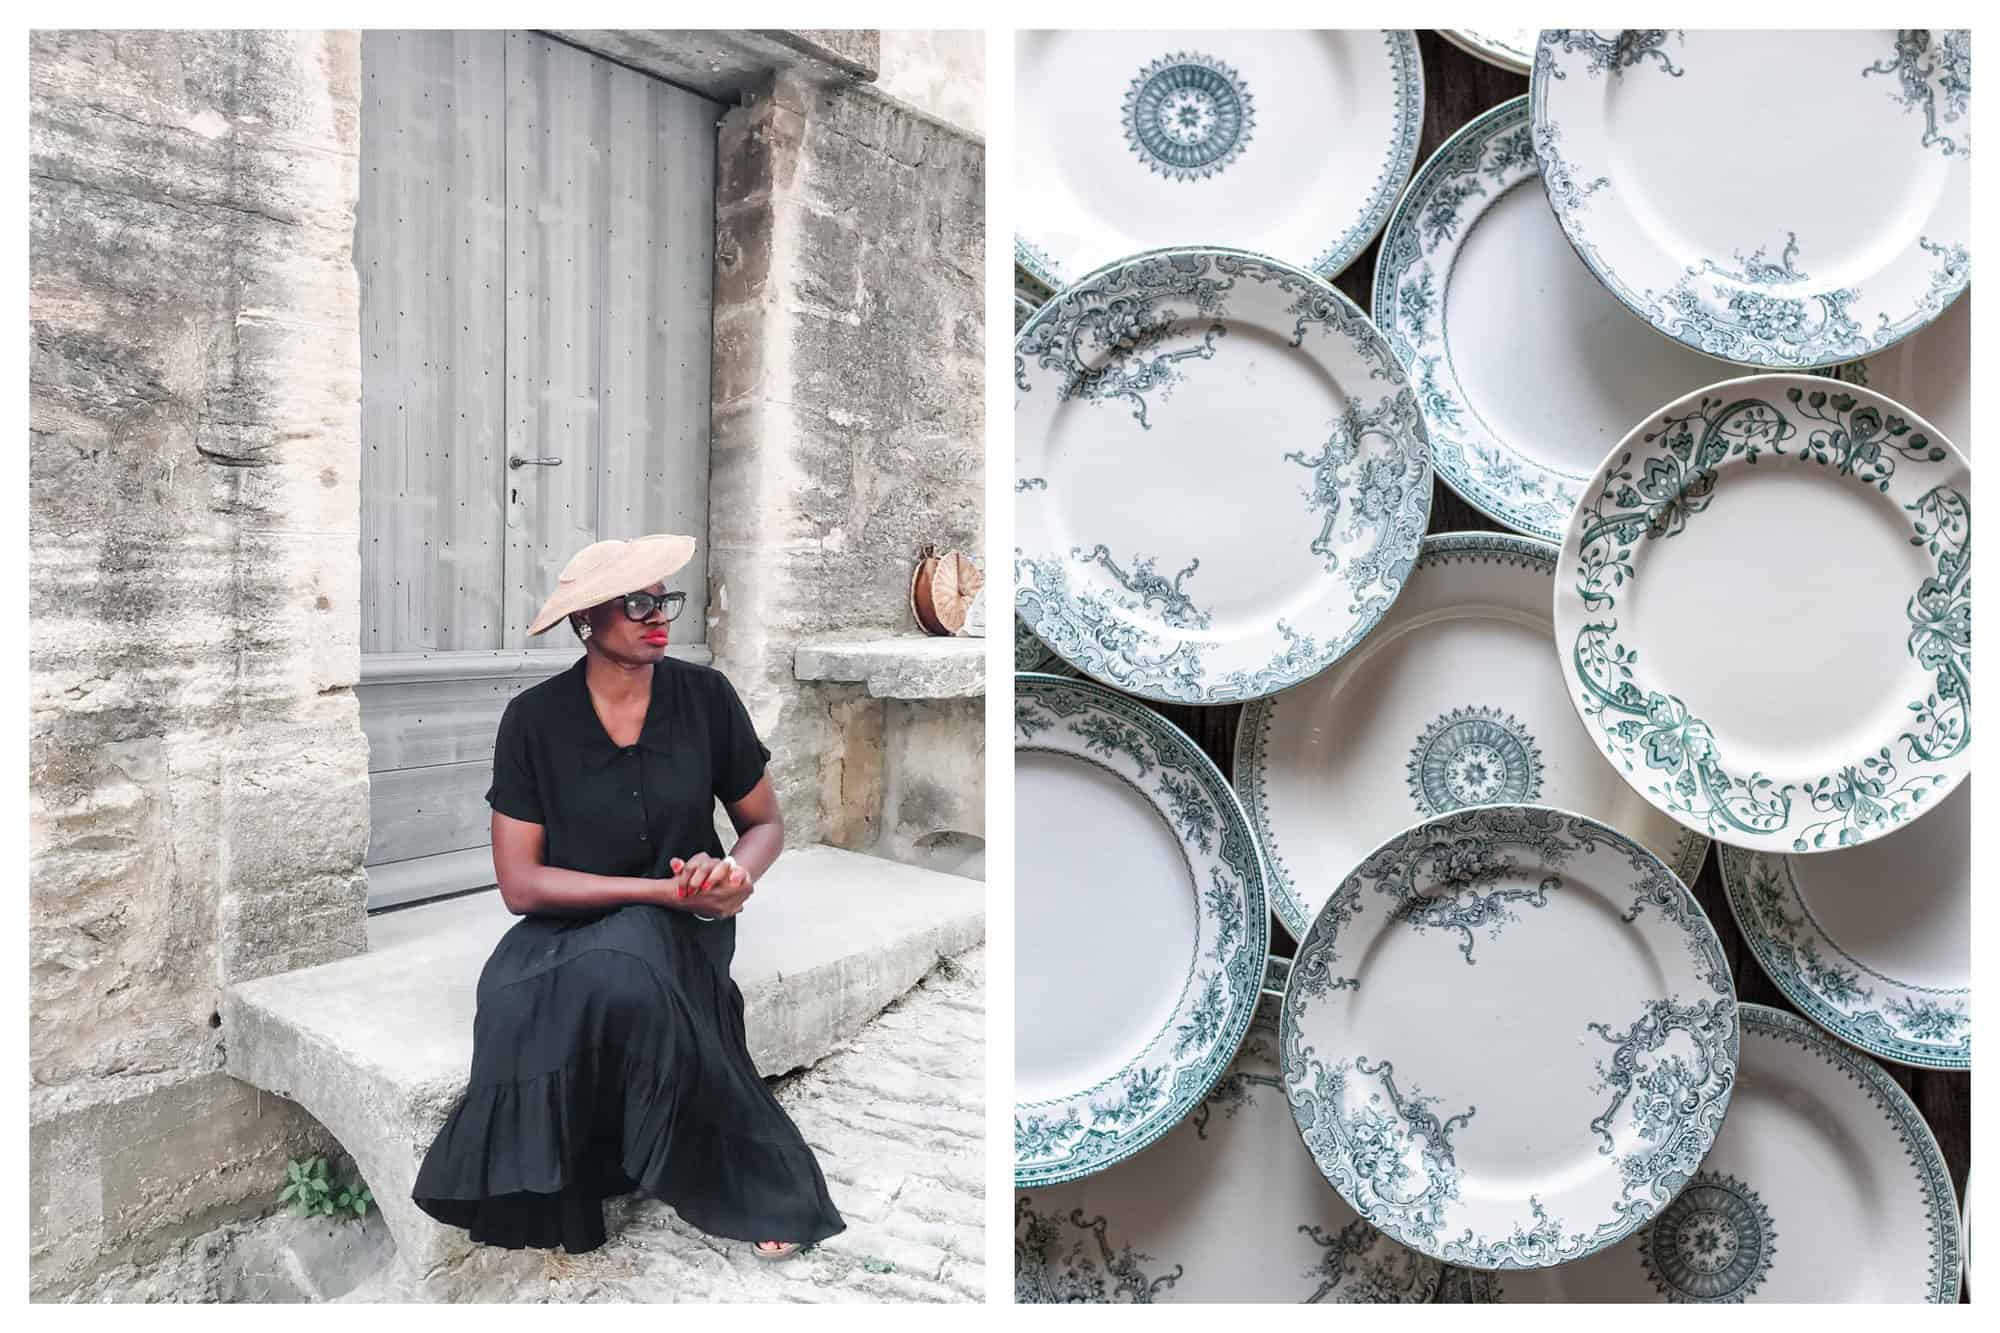 Left: Ajiri Aki is sitting in front of a French provincial gate, wearing a black dress and a wooden hat. Right: A photo of vintage plates in white and teal blue.